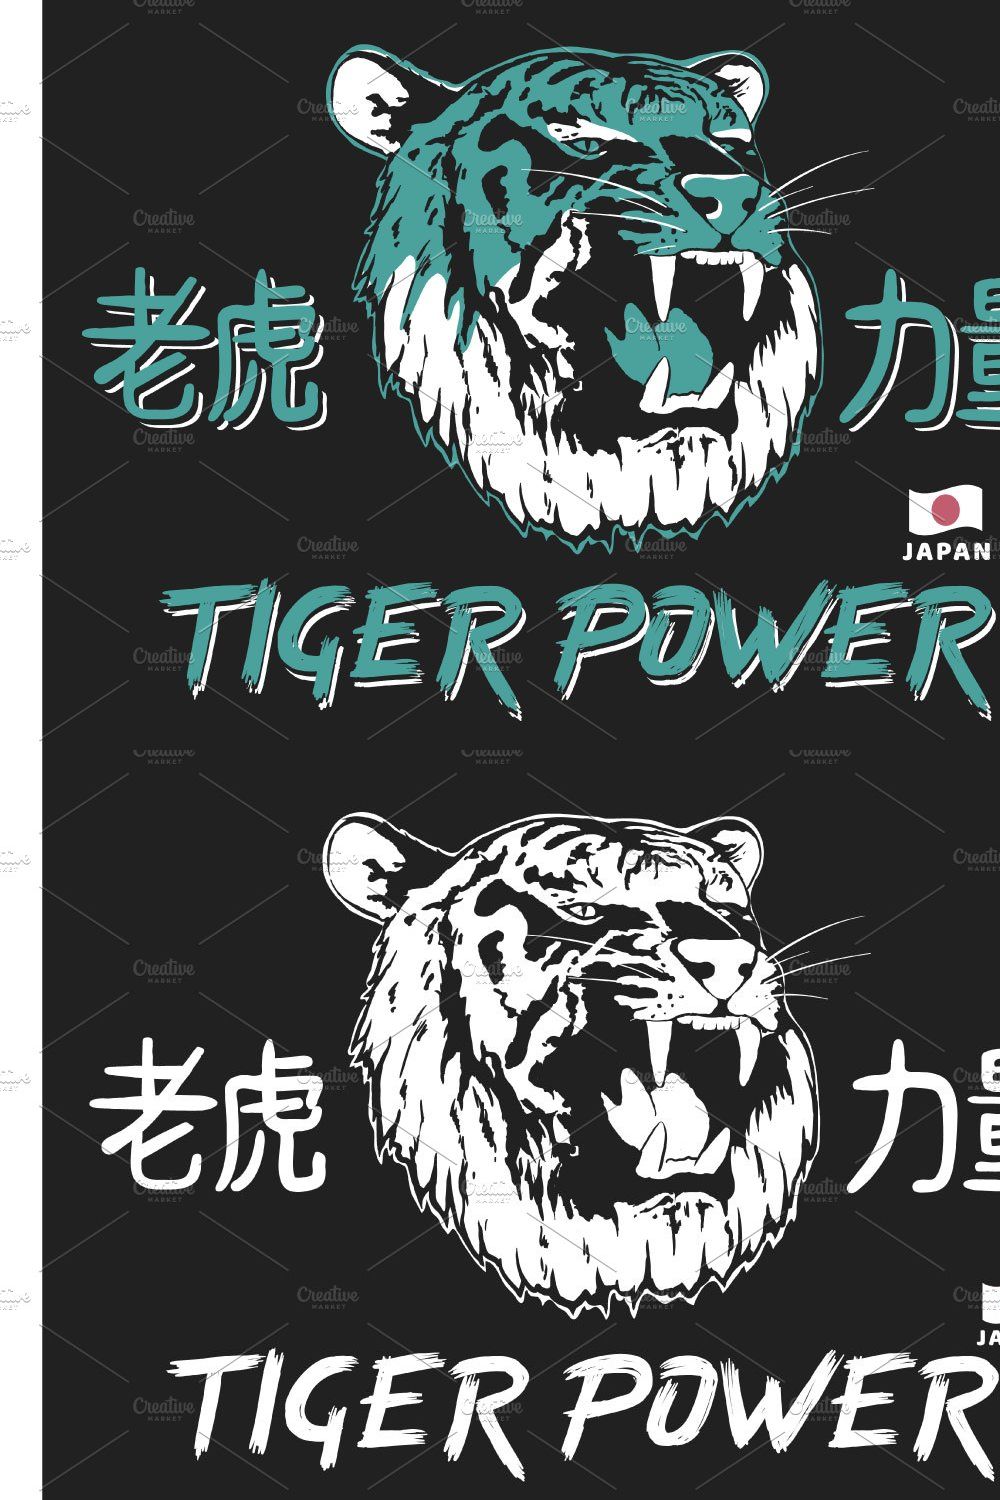 The tiger power pinterest preview image.